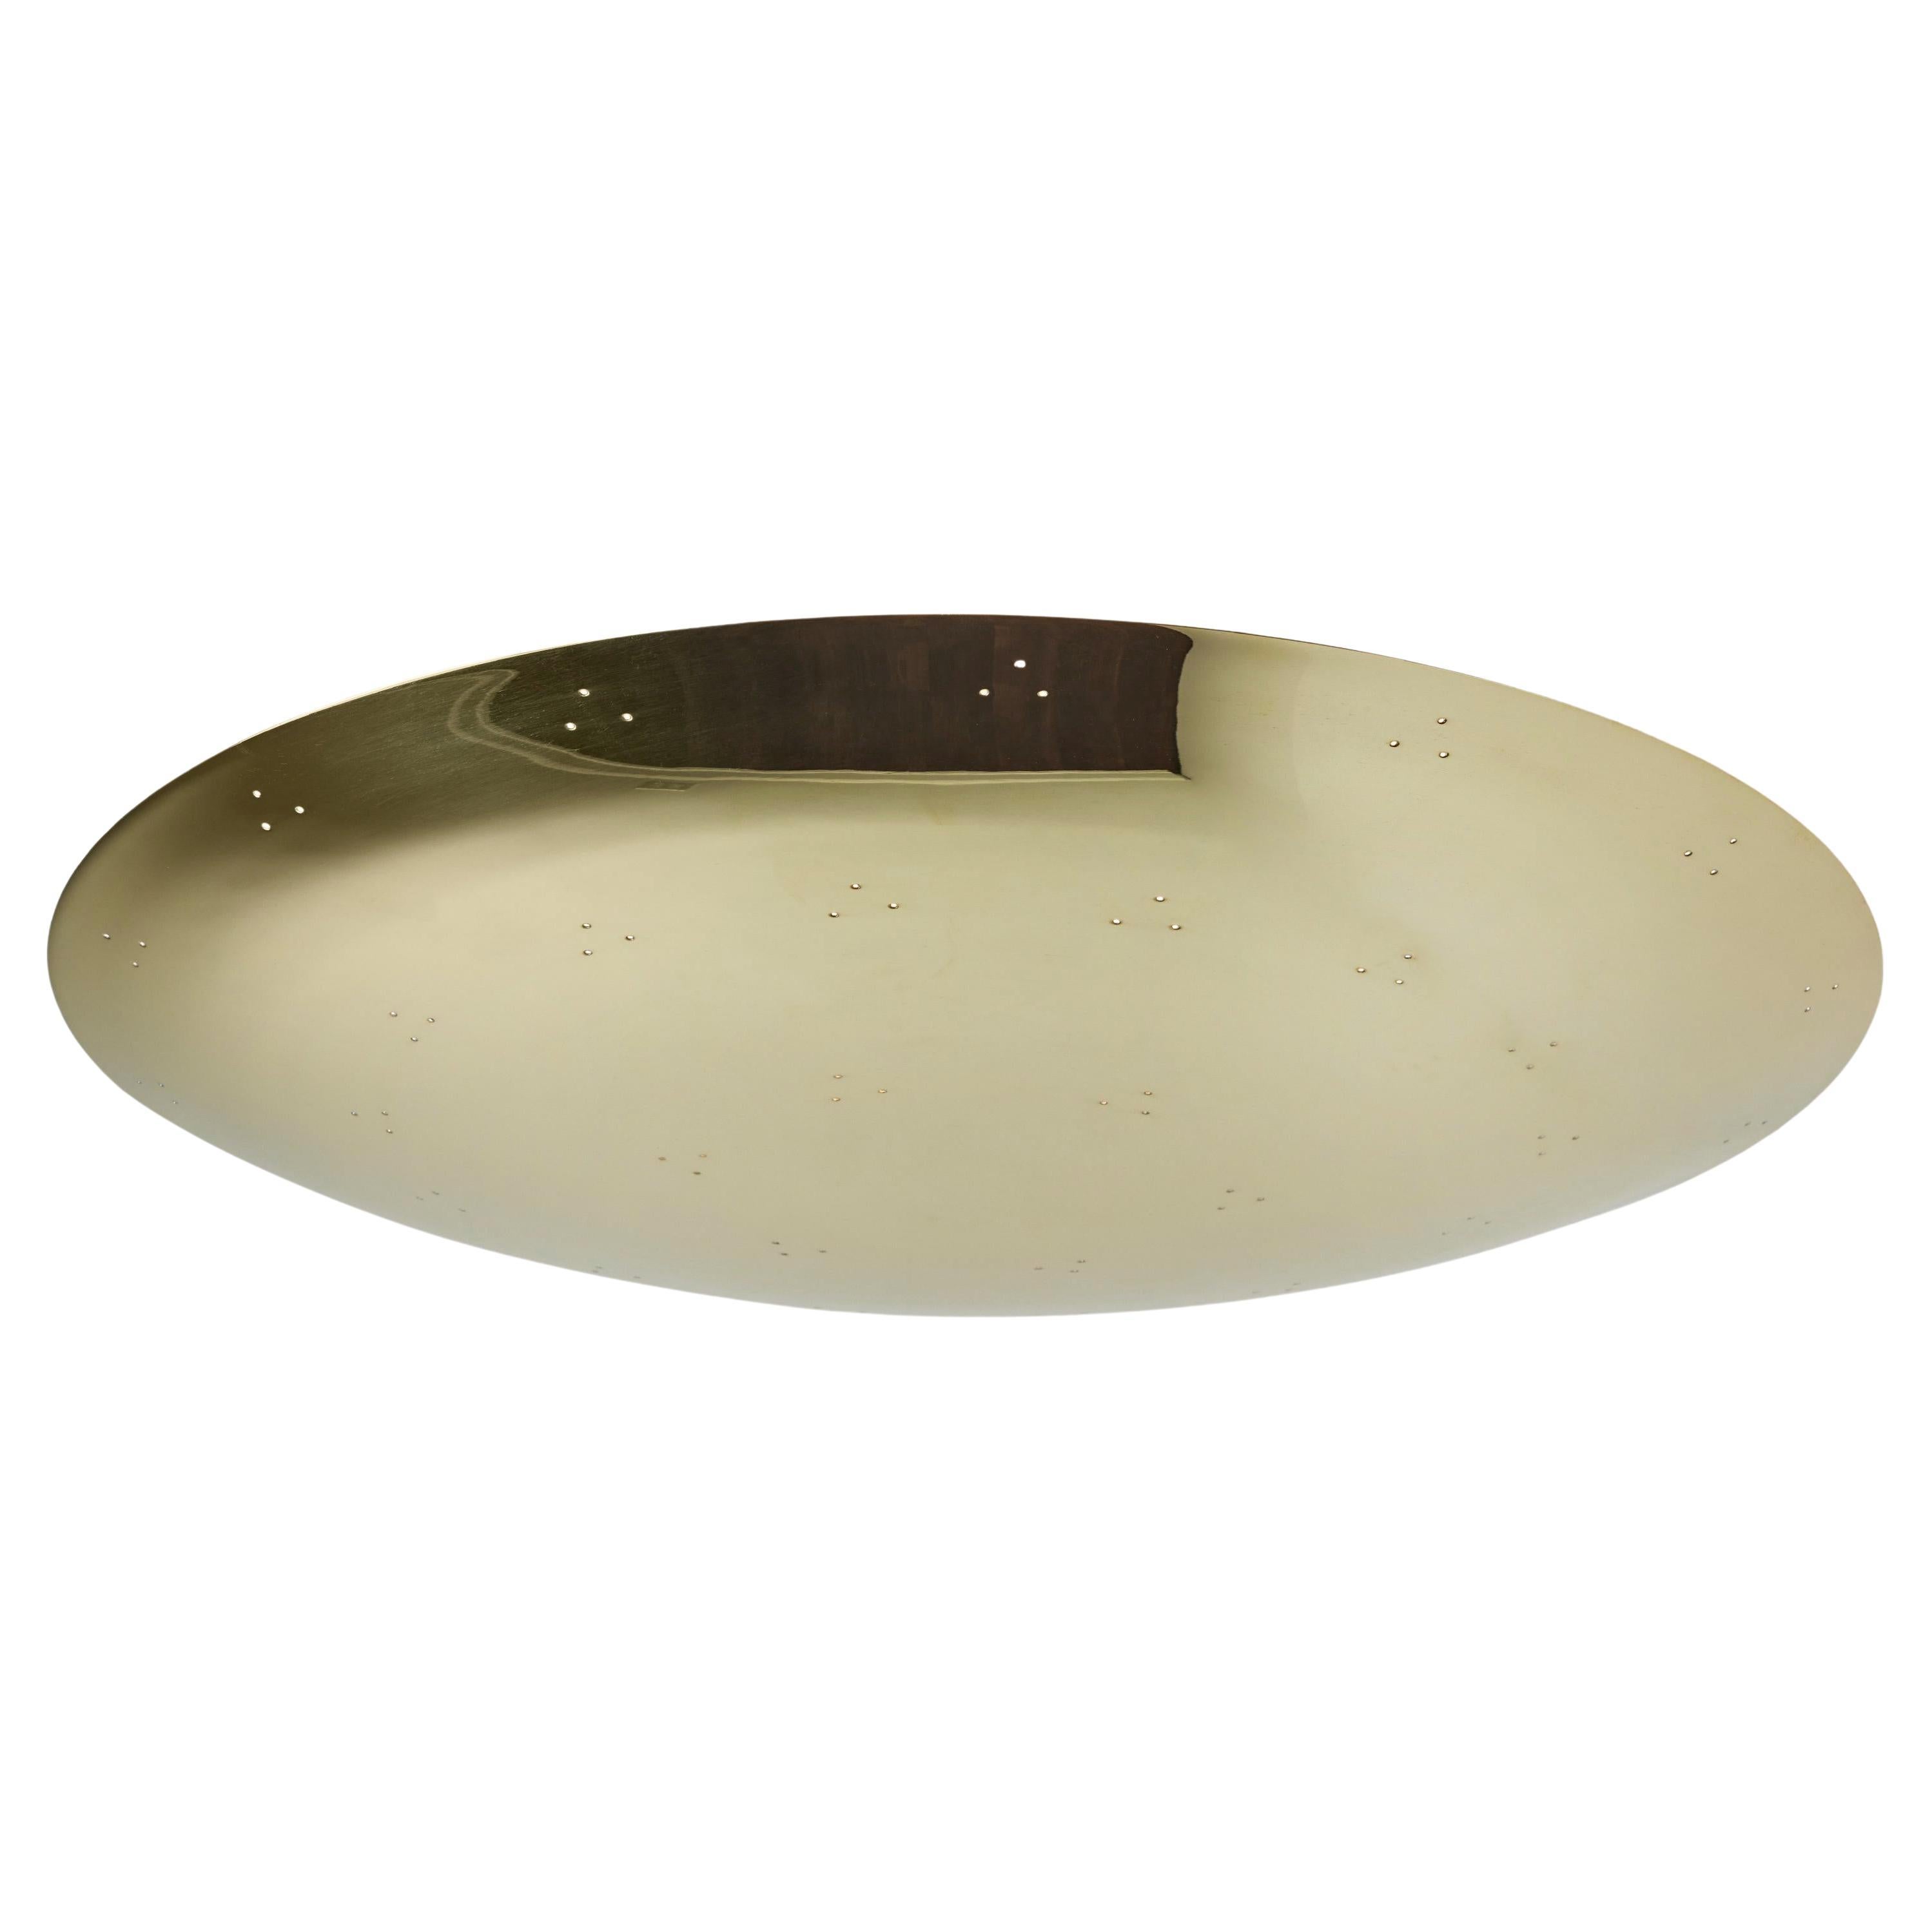 Large Two Enlighten 'Rey' Perforated Polished Brass Dome Ceiling Lamp